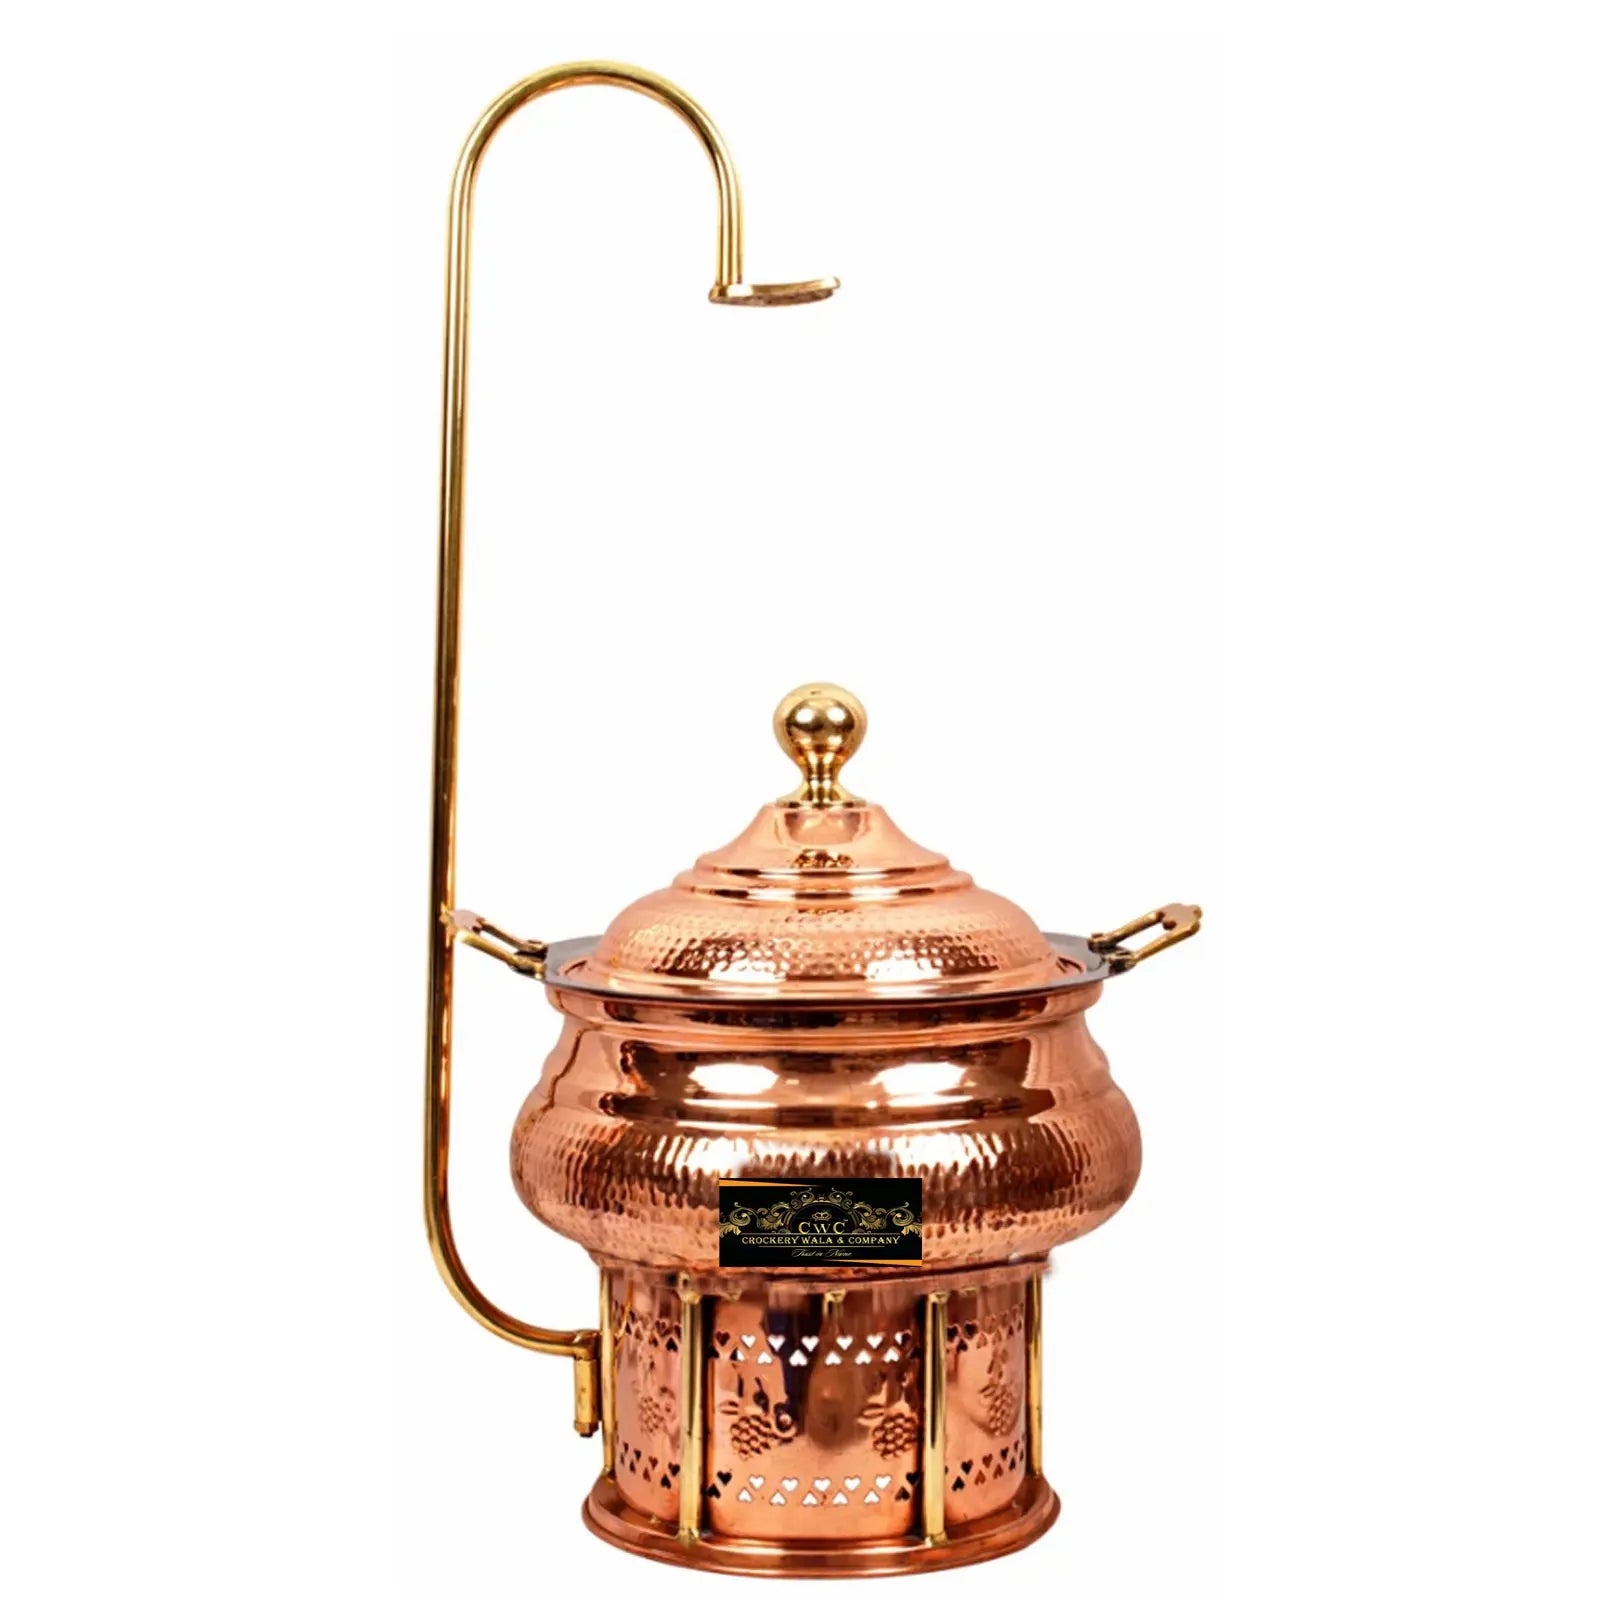 Crockery Wala And Company Copper Steel Chaffing Dish With Stand Hammered Design 6 Liters - CROCKERY WALA AND COMPANY 